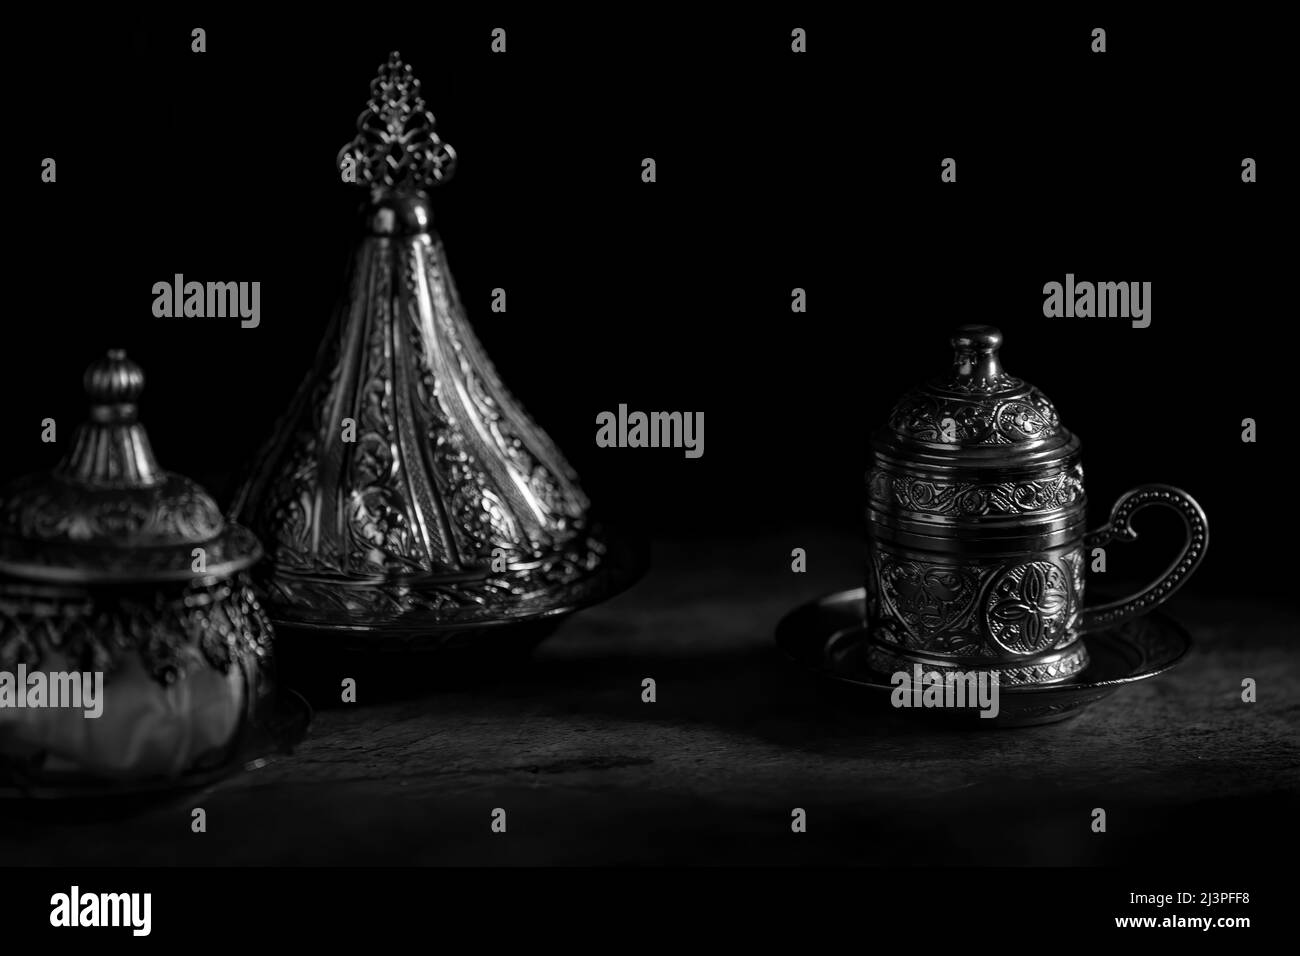 Silver coffee or tea cup and sugar jars with Dates Stock Photo